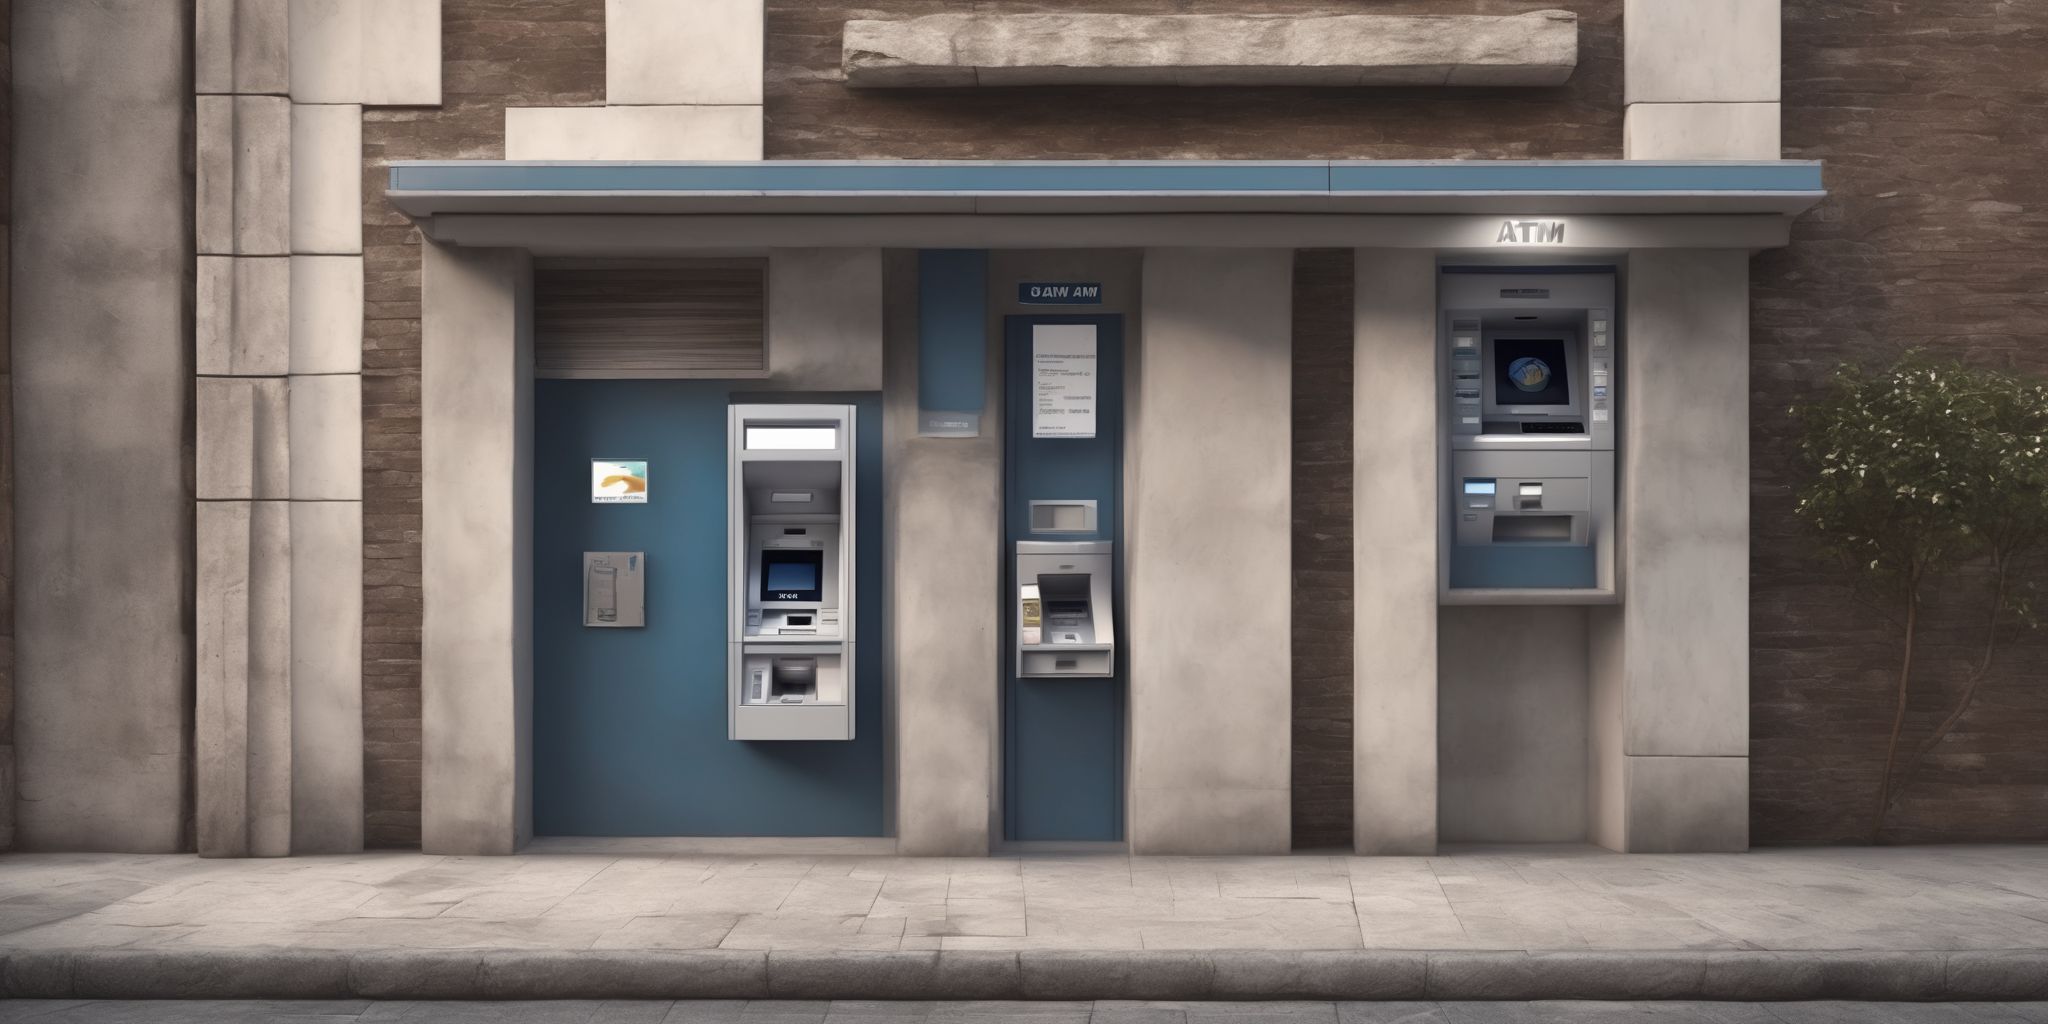 ATM  in realistic, photographic style